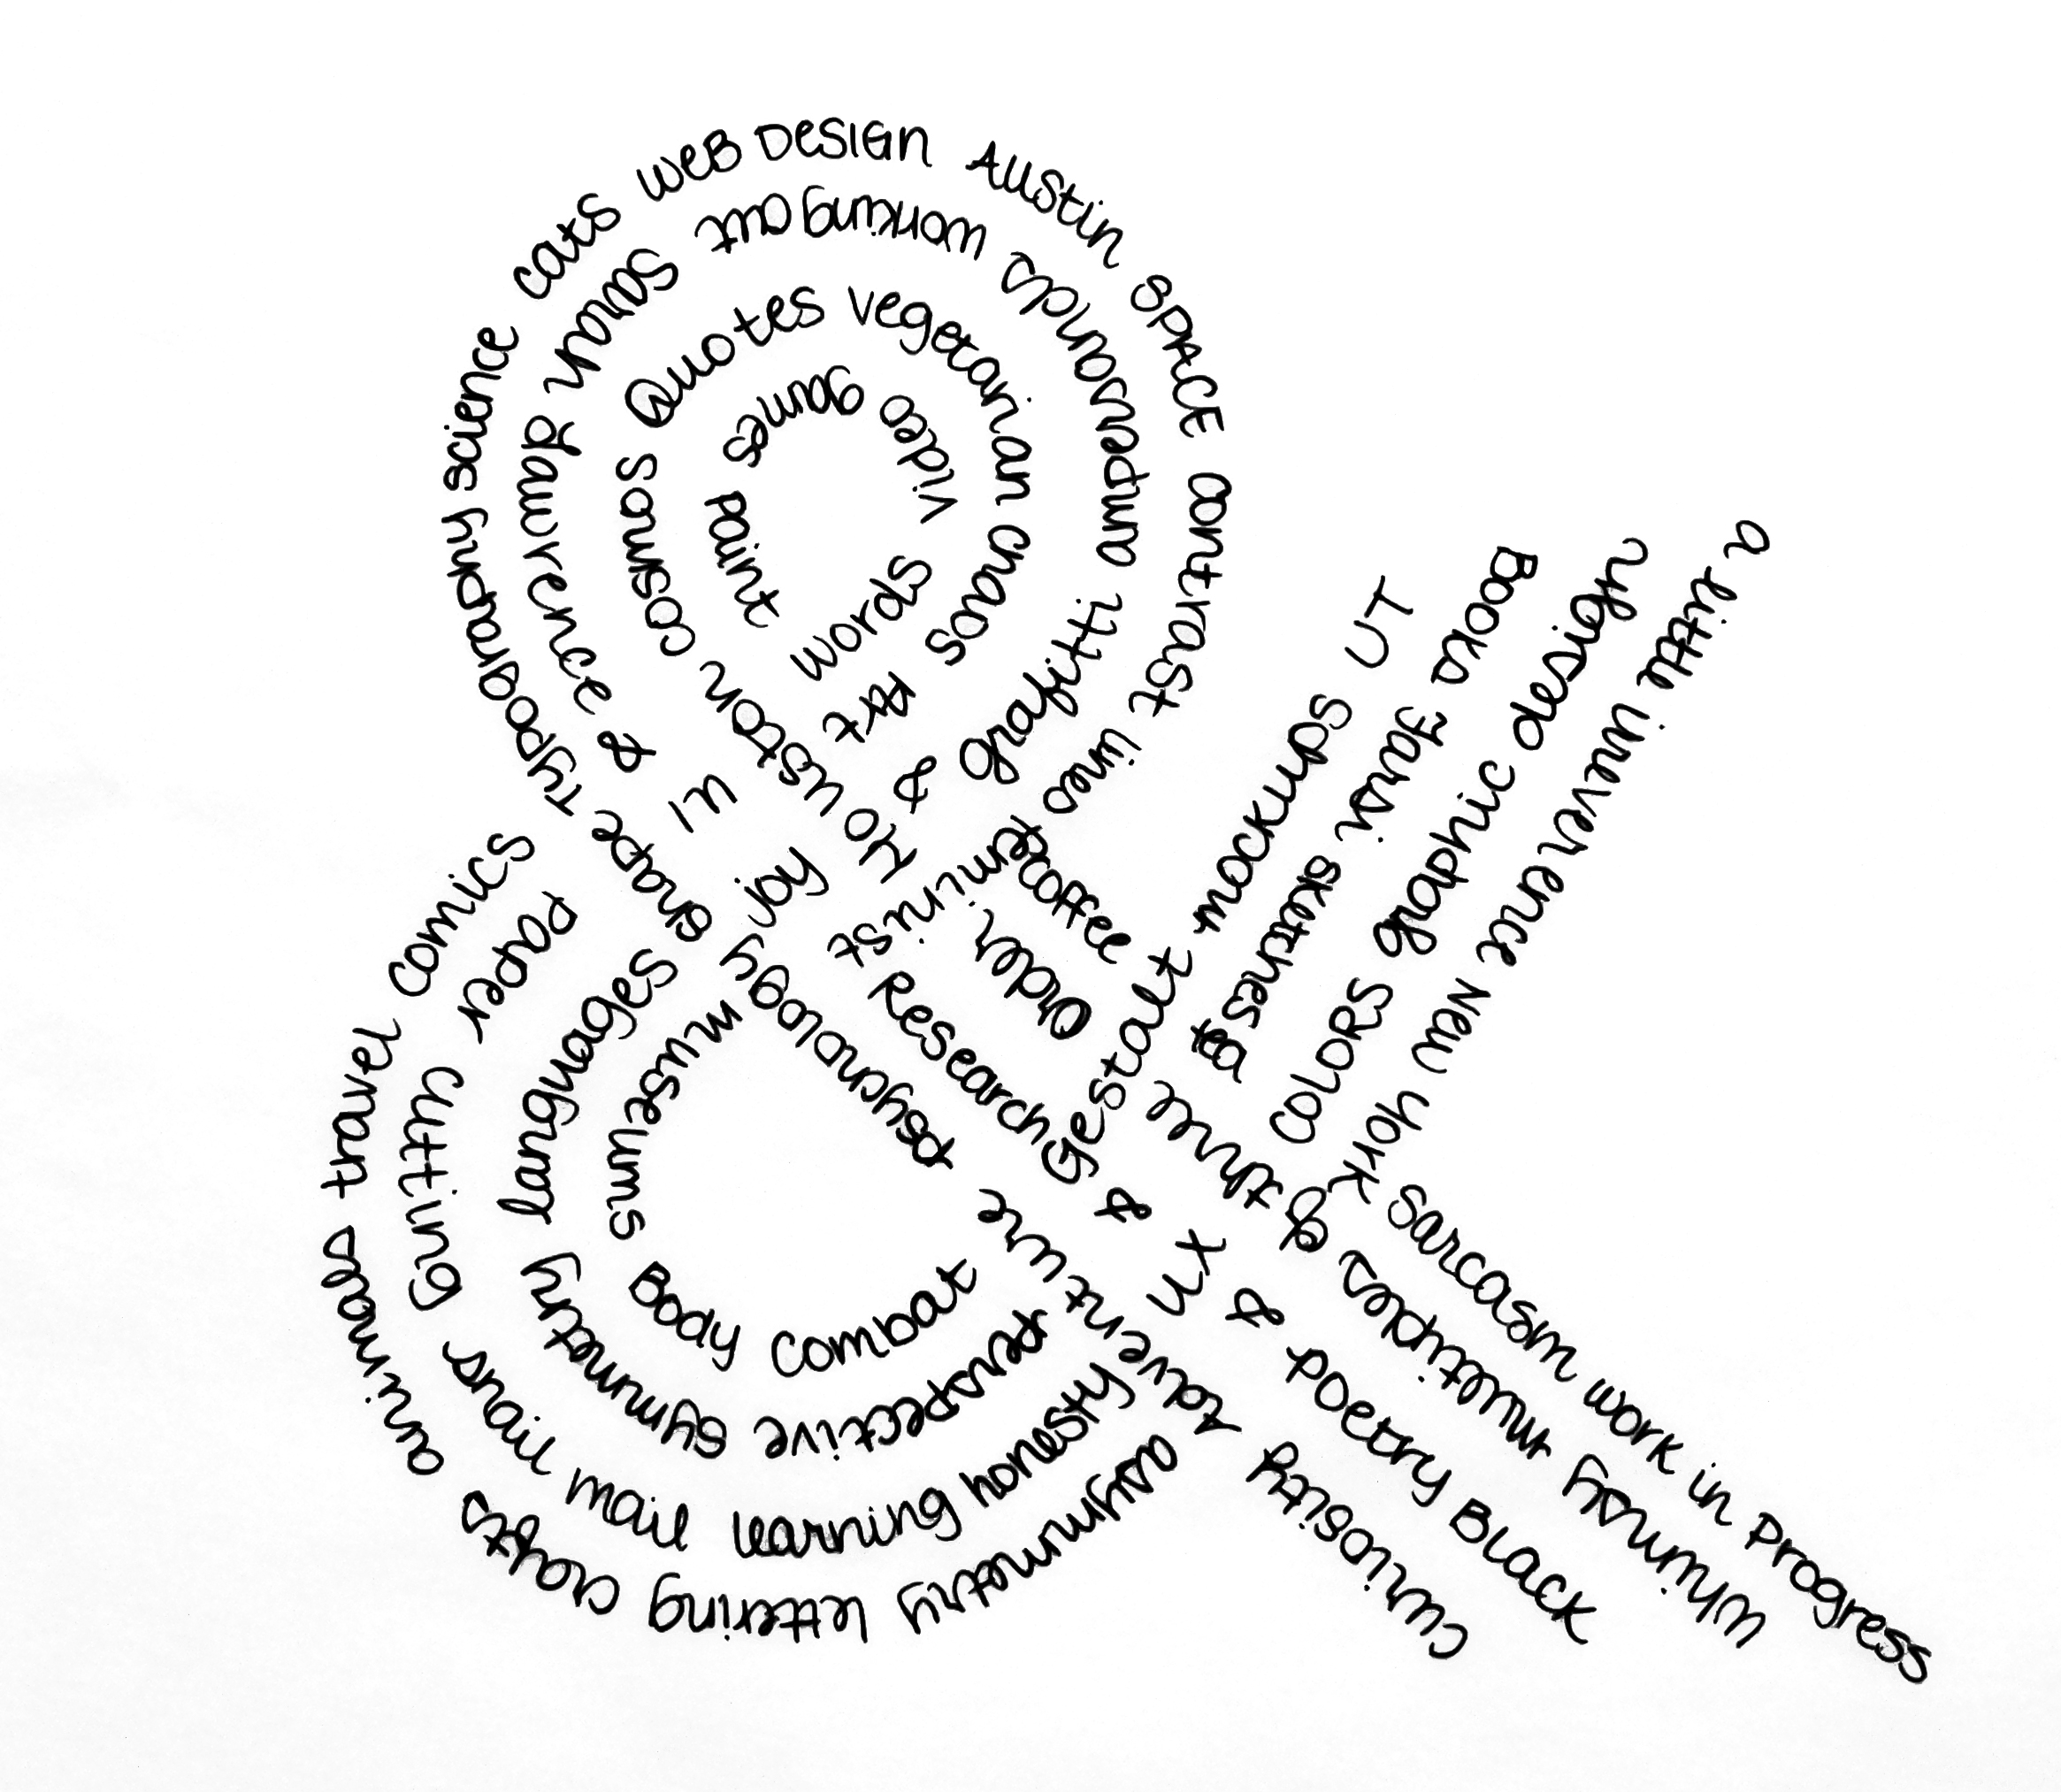 A handdrawn ampersand I created made up of words that describe or relate to me and my interests. The words are: curiosity, adventure, psychology, shape, typography, science, cats, web design, Austin, space, contrast, lines, feminist, museums, Body Combat, Gestalt, mockups, UT, books, Farsi, sketches, ampersand, perspective, symmetry, languages, joy, grafitti, ampersands, working out, Sarah Lawrence, research, poetry, black, whimsy, multiples of three, order, Houston, cosmos, quotes, vegetatian, chaos, art, UI, paper cutting, snail mail, learning, honesty, UX, colors, graphic design, a little irreverence, New York, asymmetry, lettering, crafts, animals, travel, comics, words, video games, paint, coffee, sarcasm, work in progress.